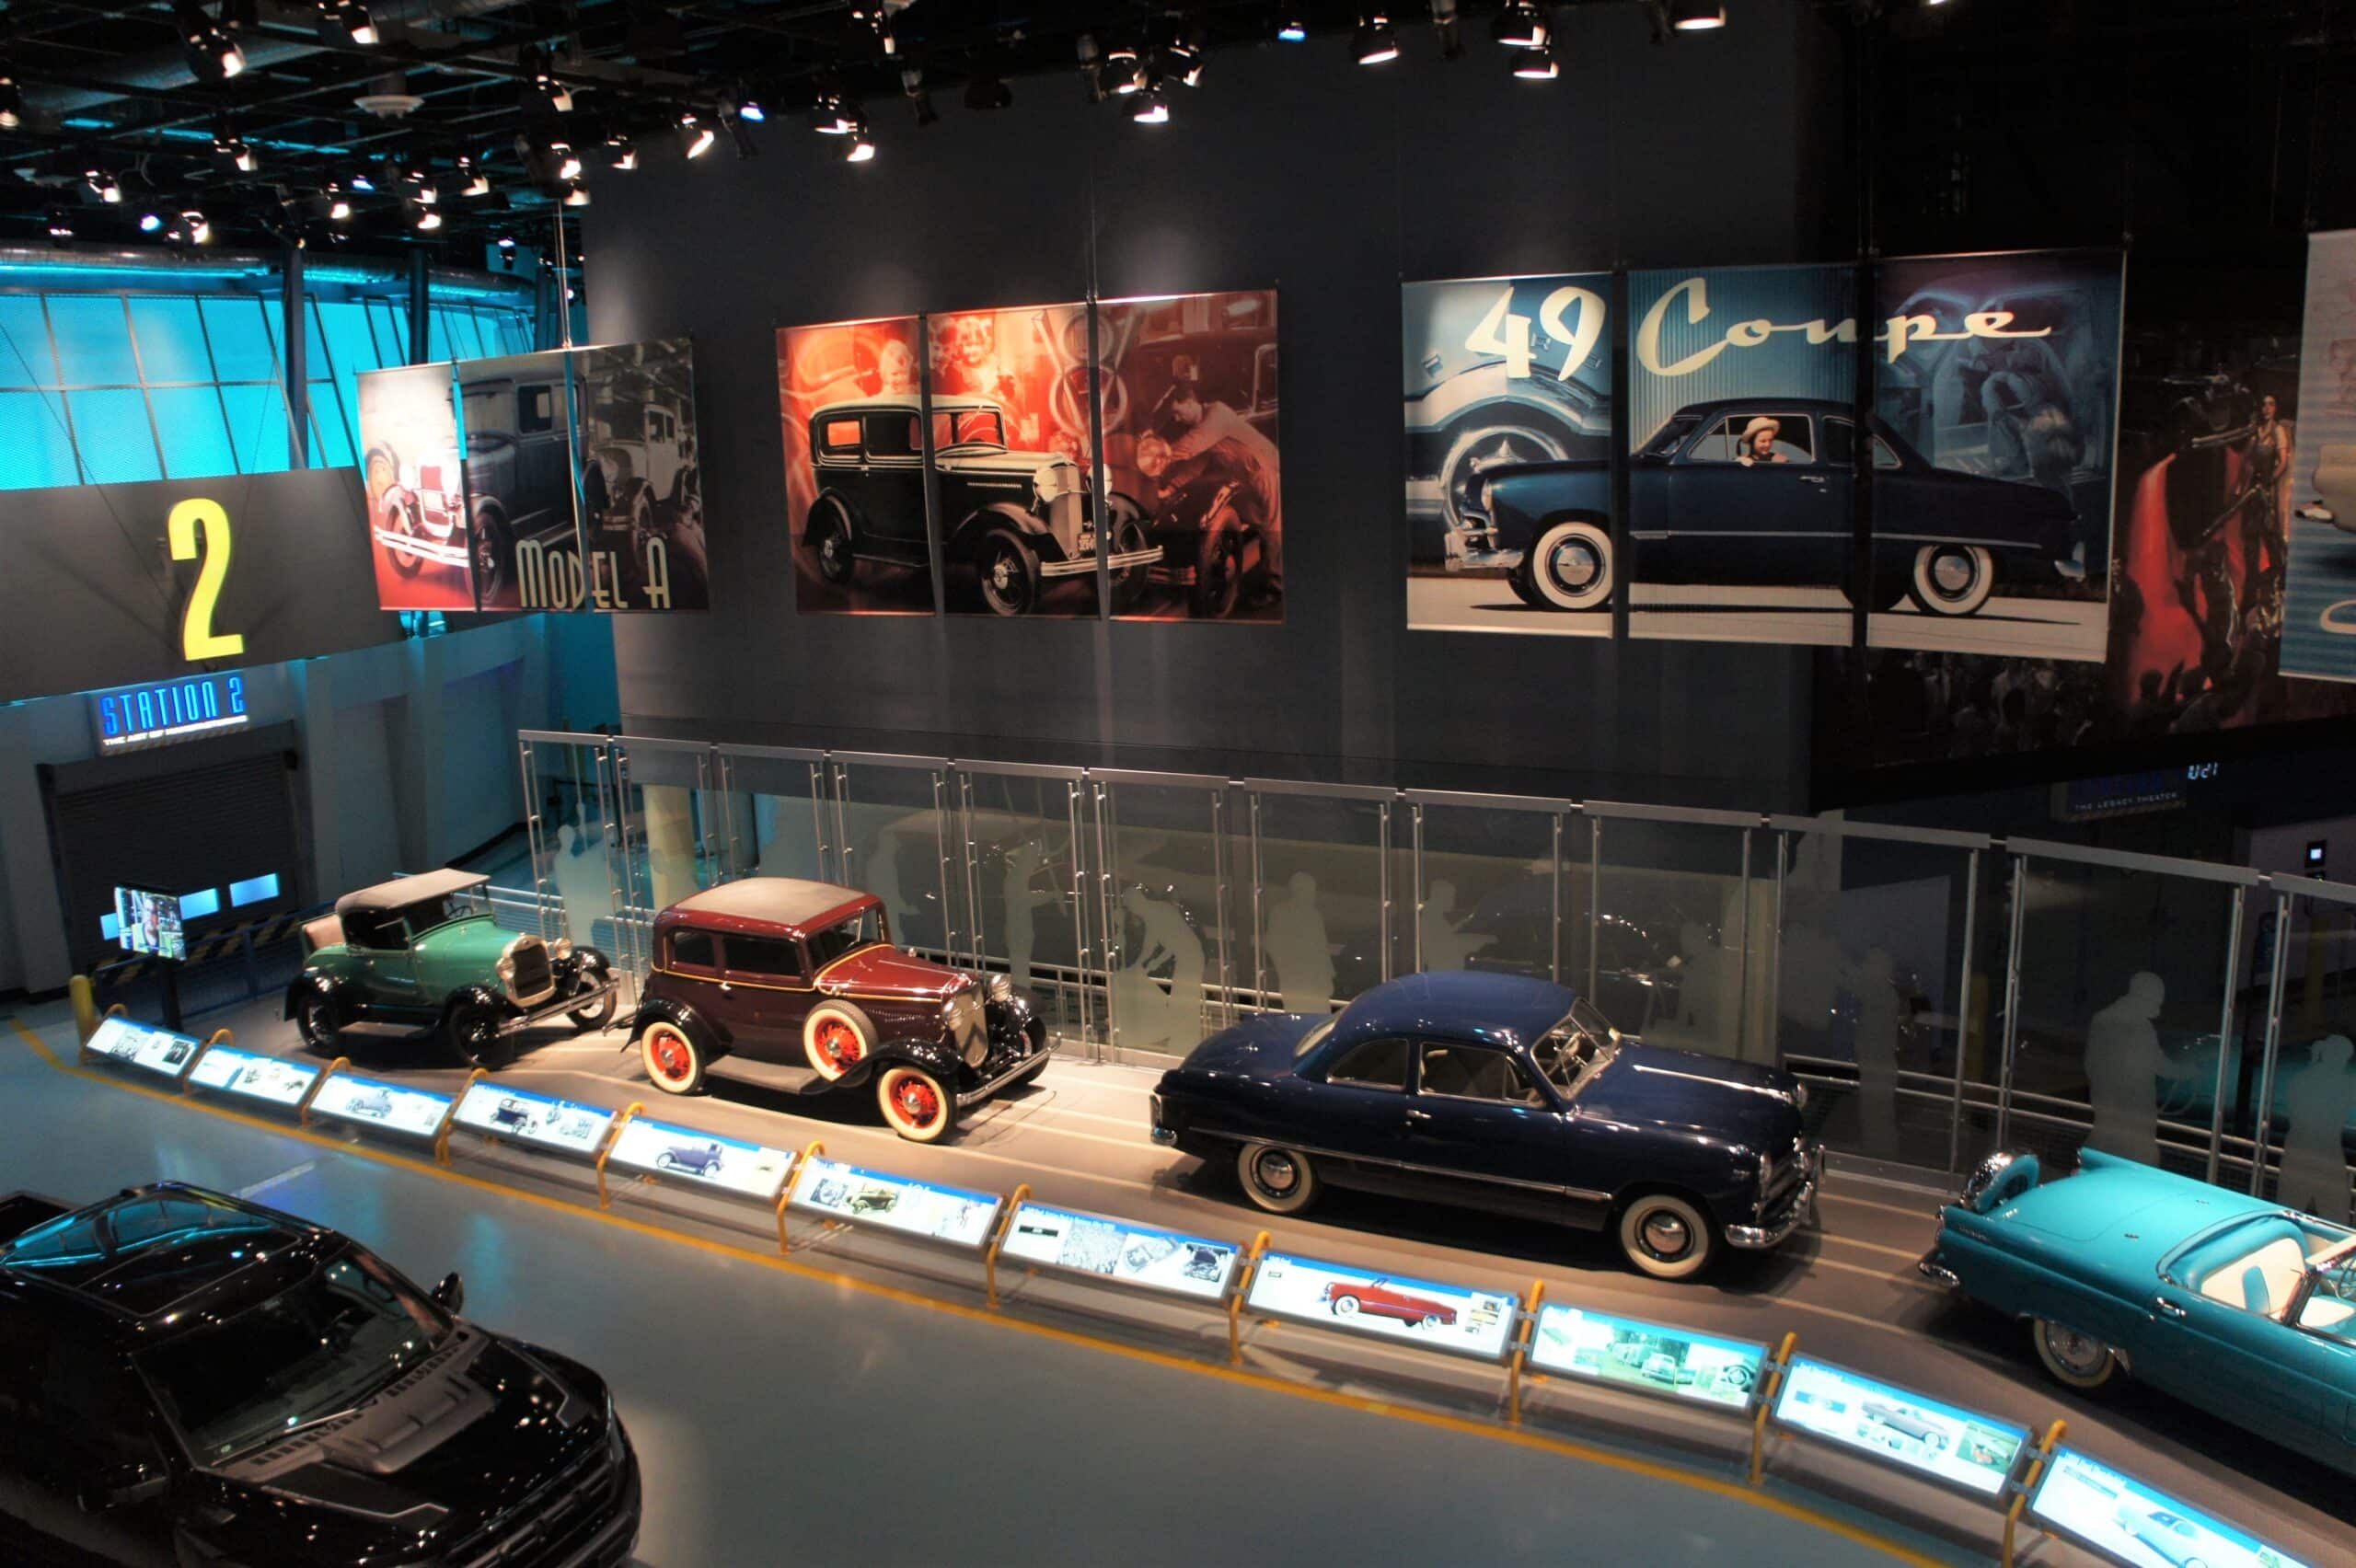 Ford Factory Exhibits